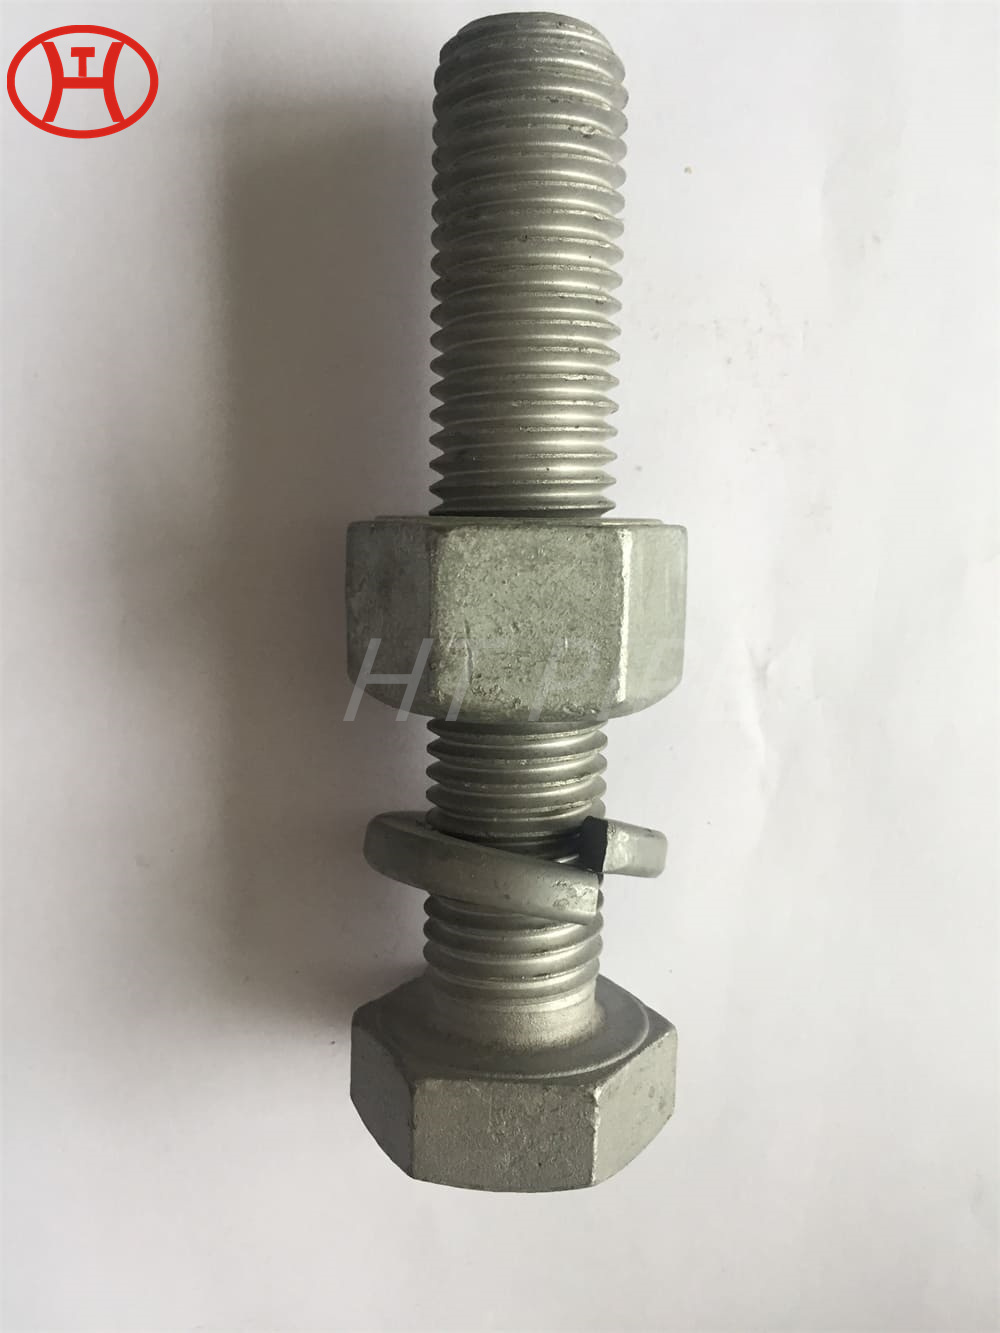 DIN931 Hot dip Galvanizing Nickel Alloy Steel UNS N08811-Inconel800HT Hex bolts with partial threadmild steel and nuts manufac